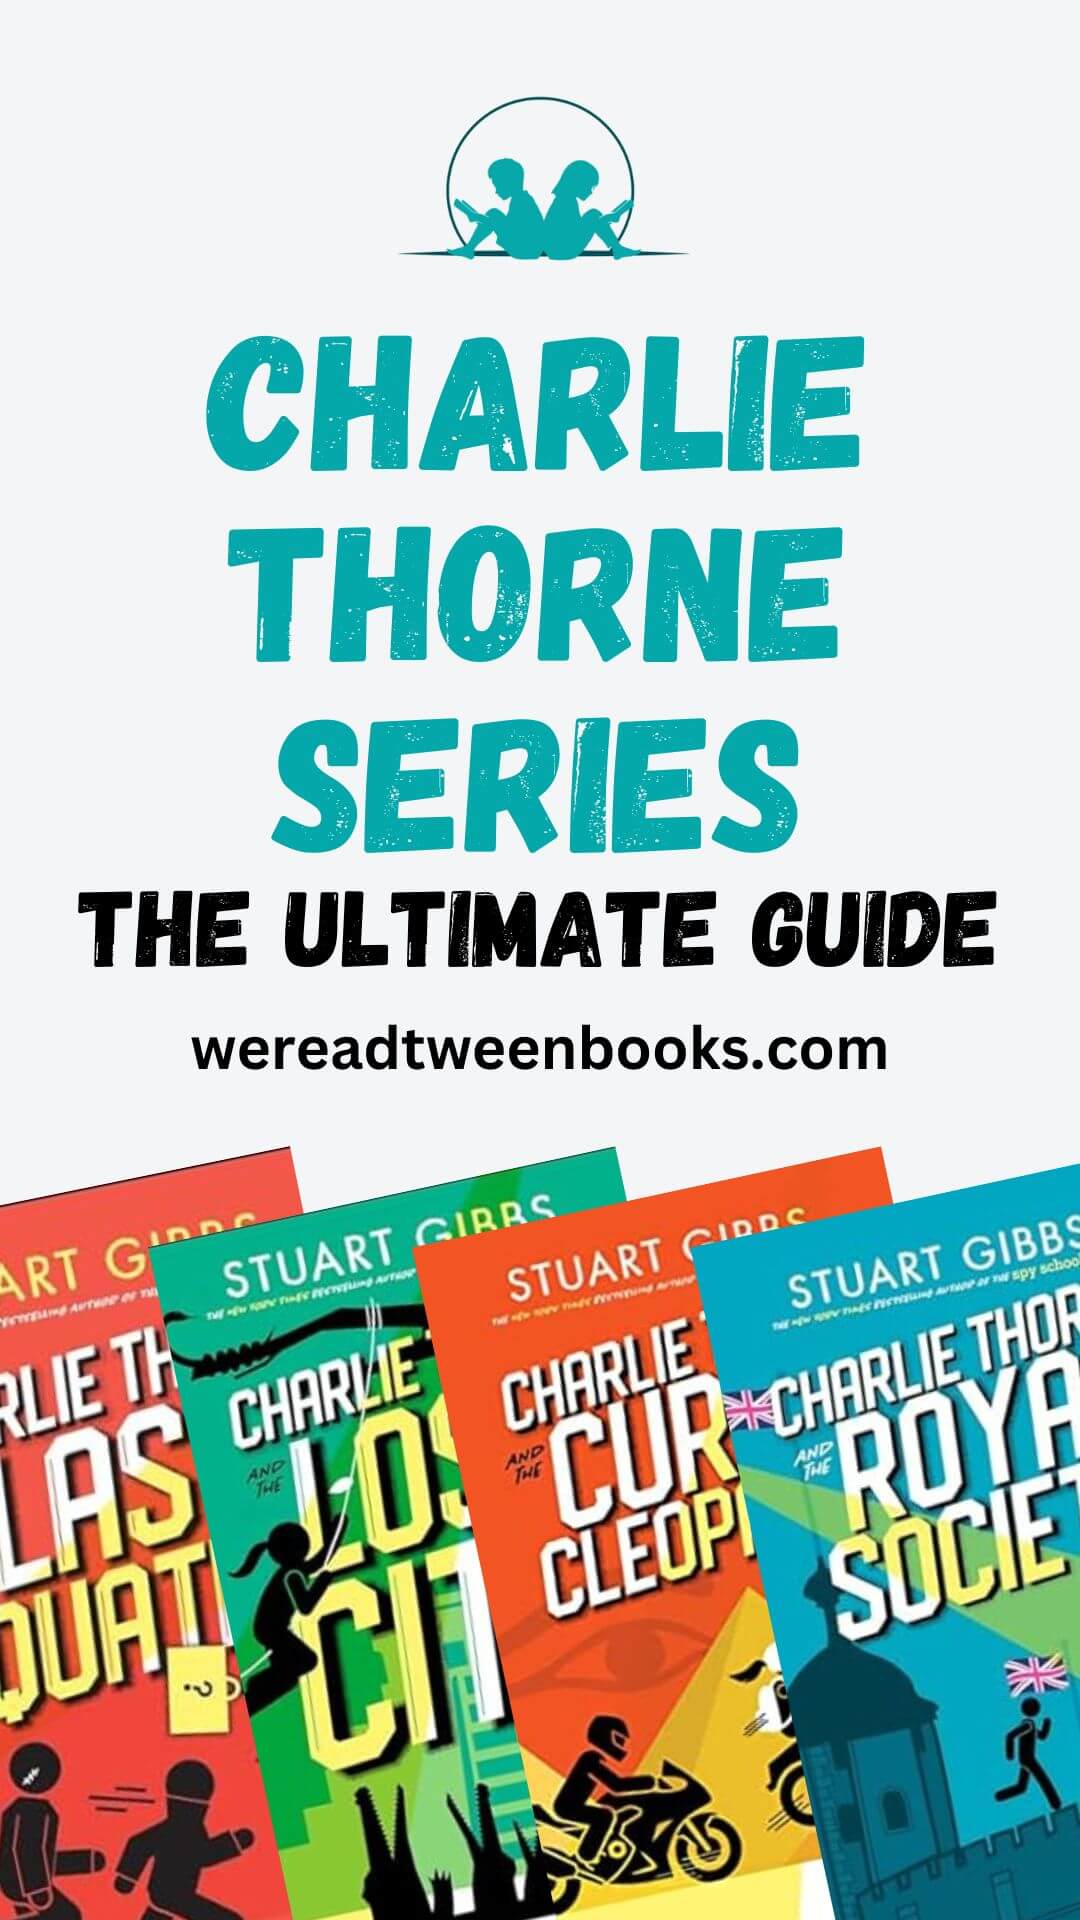 Check out the complete guide to Charlie Thorne series in order on We Read Tween Books if your tween reader loves books about adventure and spies!